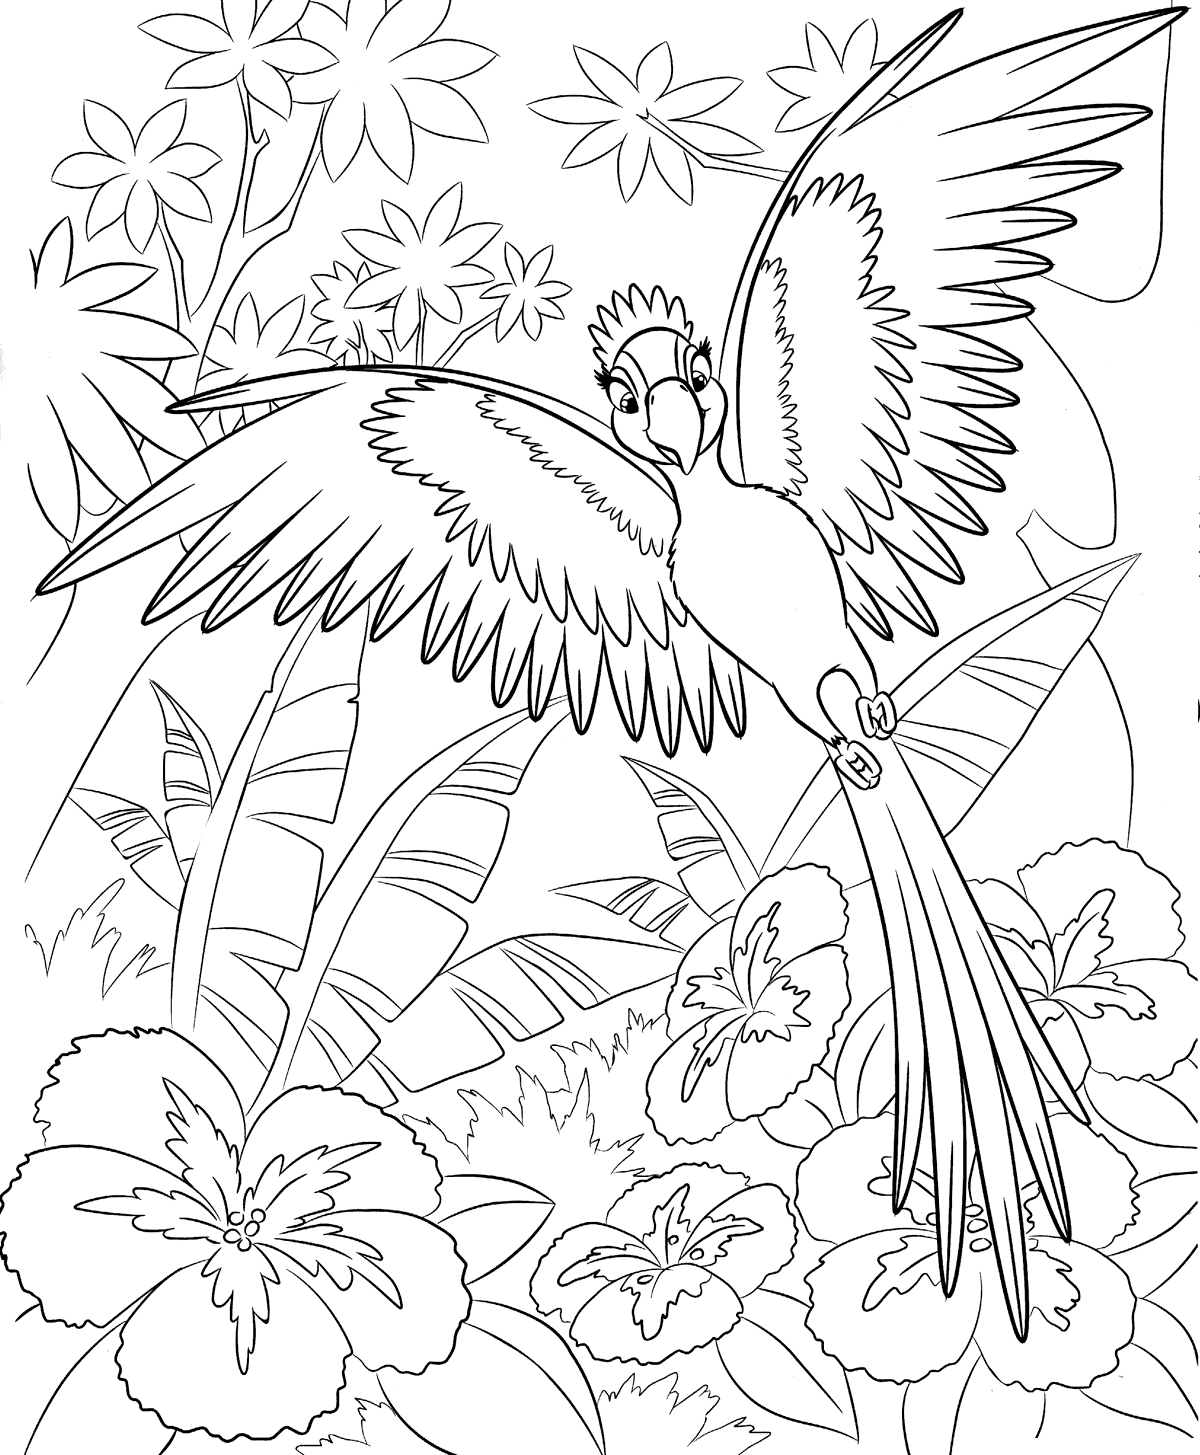 Coloring page - Jewel